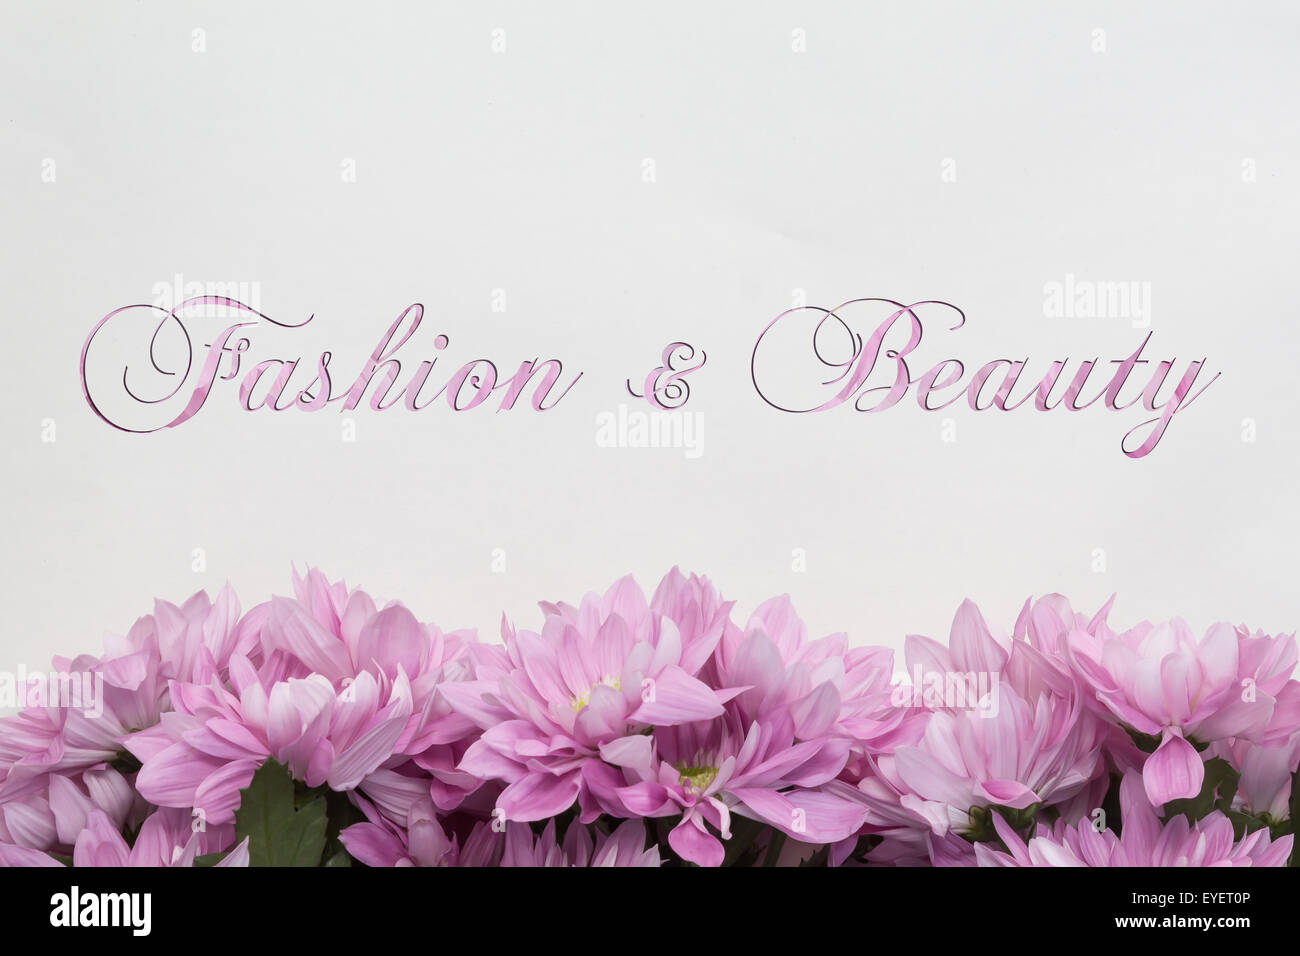 Fashion and beauty flower decoration Stock Photo